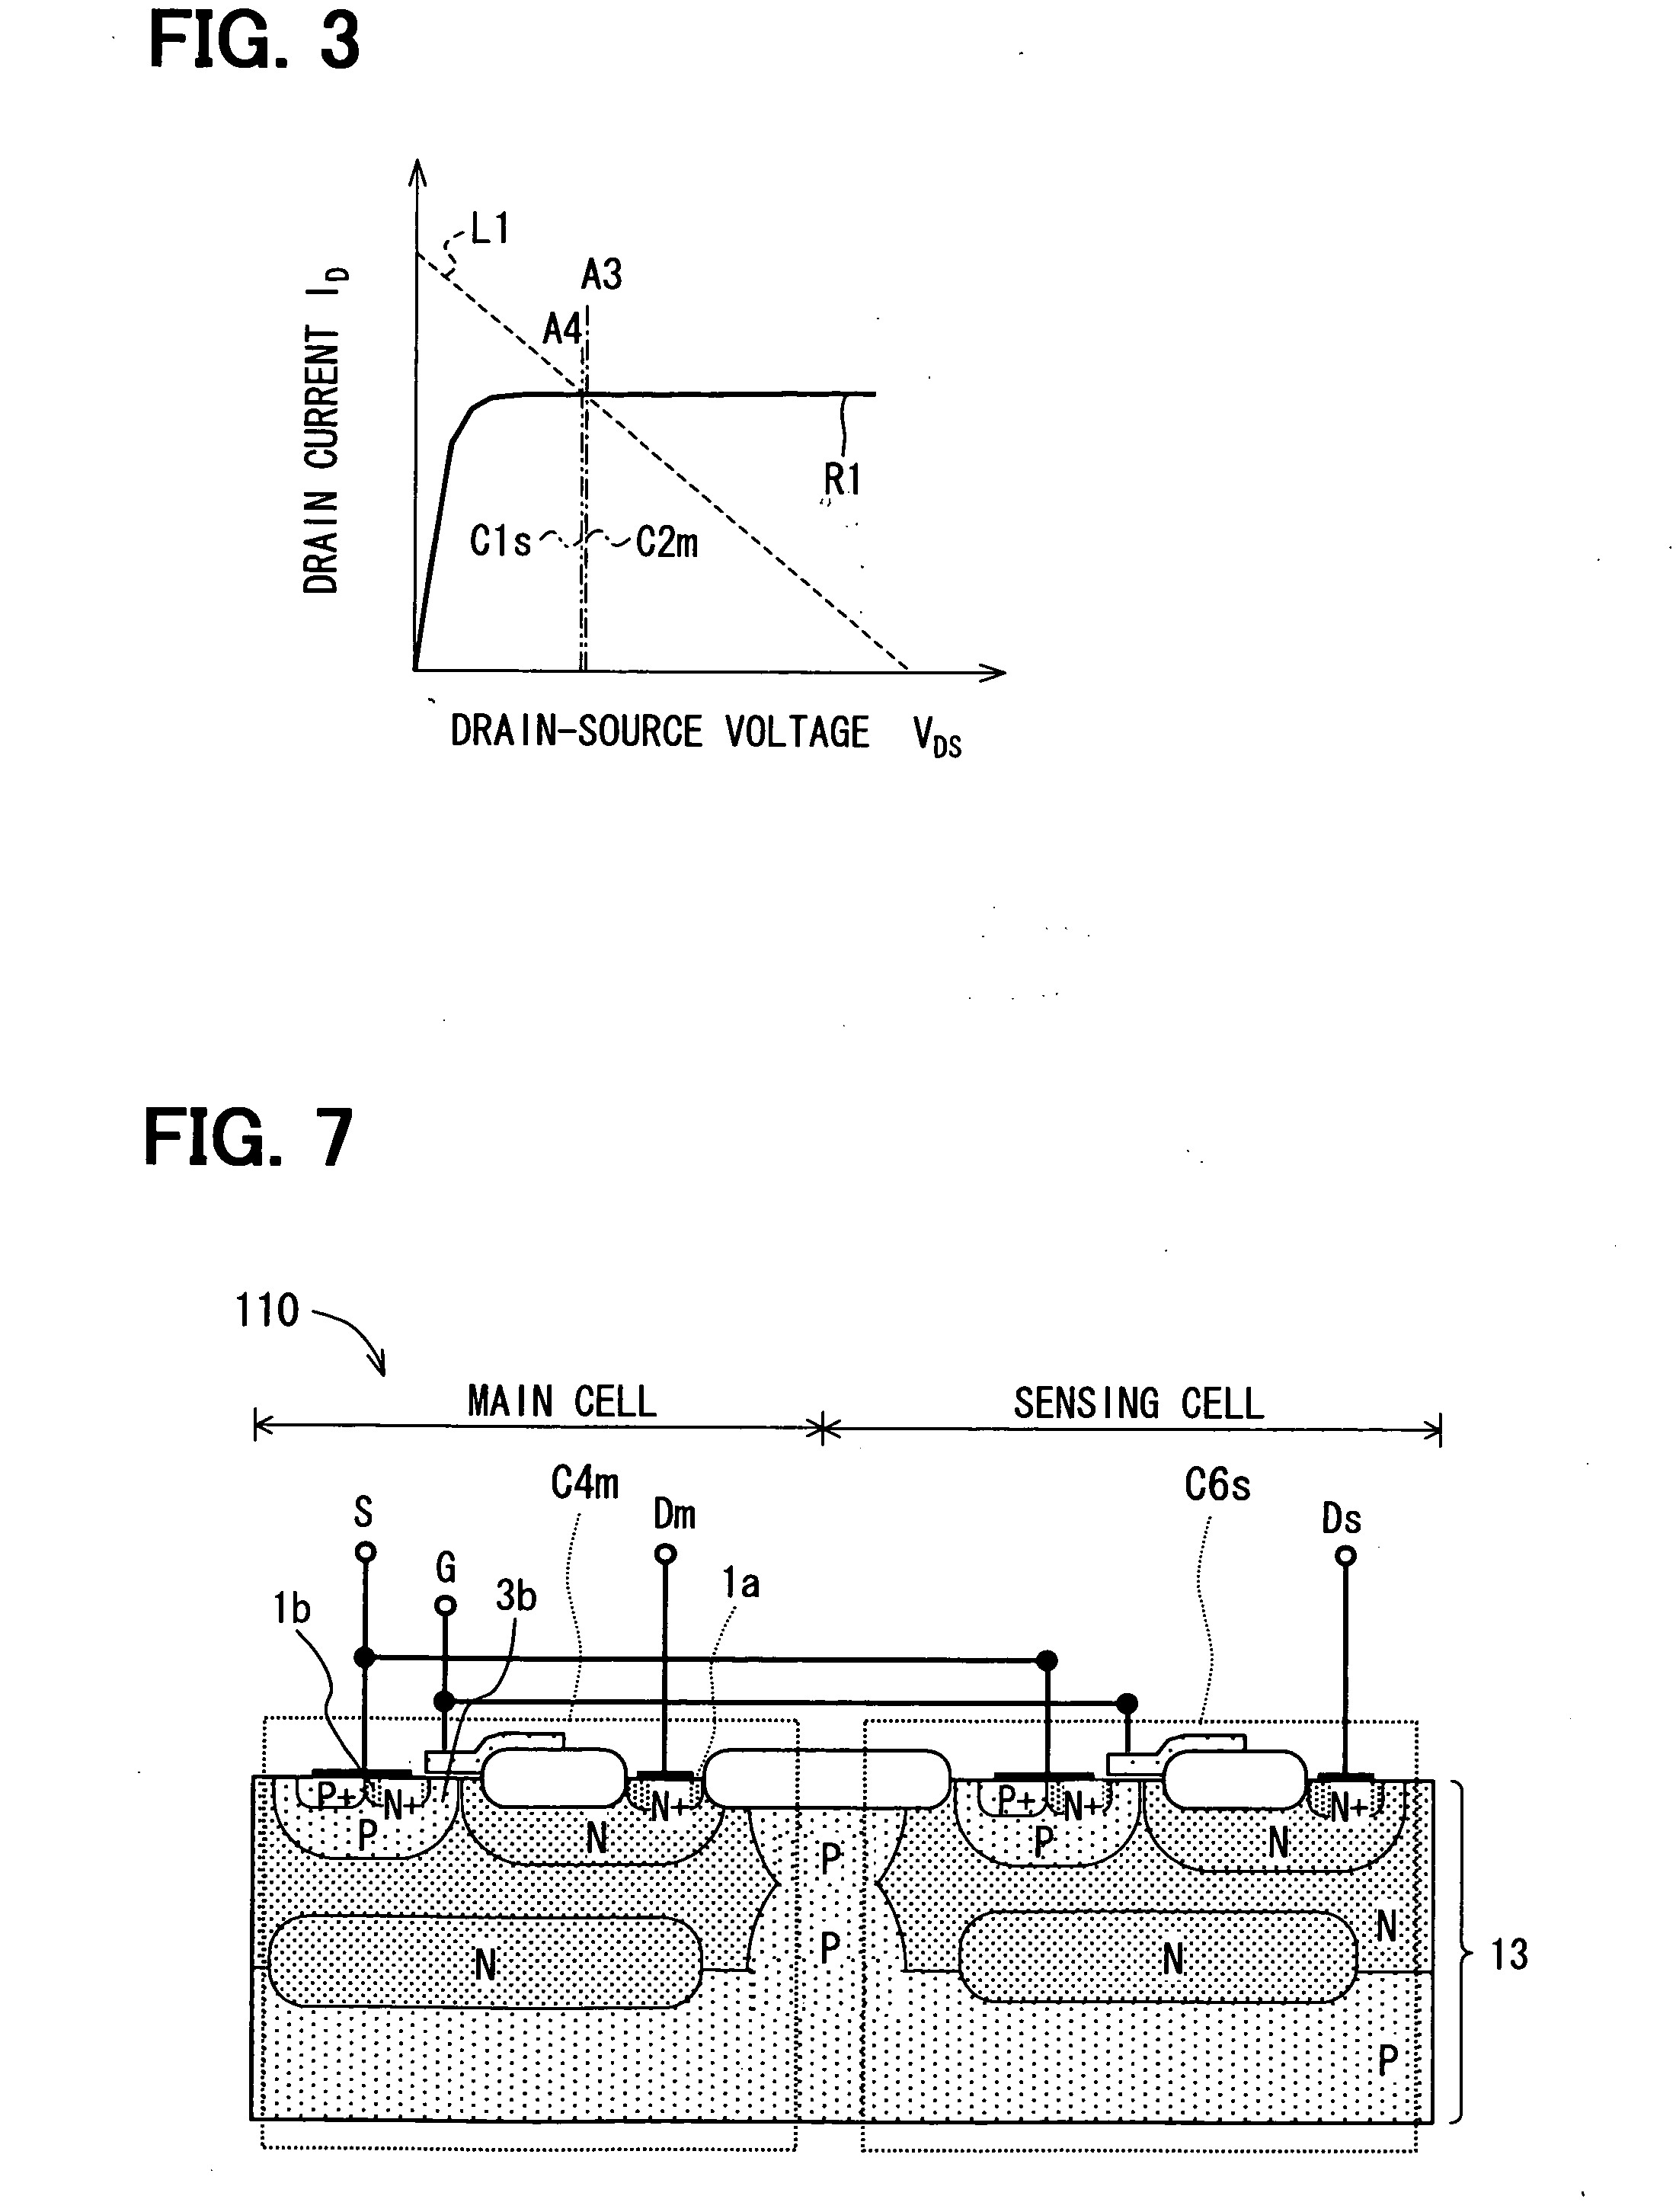 Semiconductor device including a plurality of cells